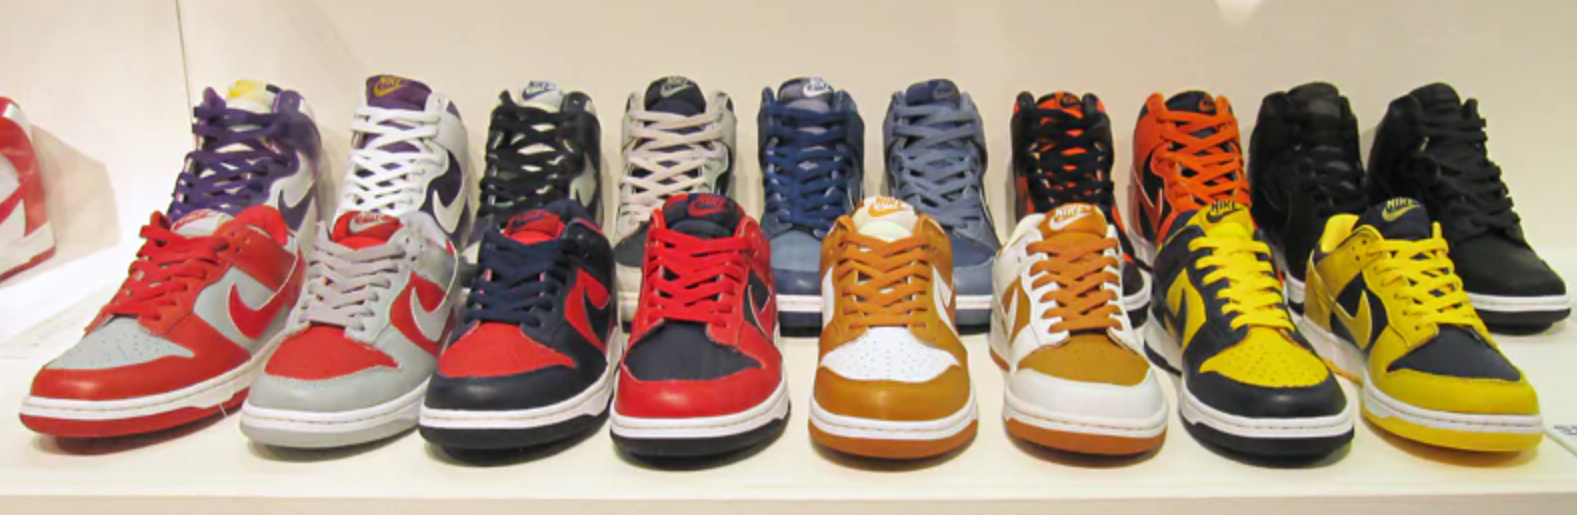 nike dunk ナイキ ダンク 歴史 Be True To Your School Nike Dunk Series